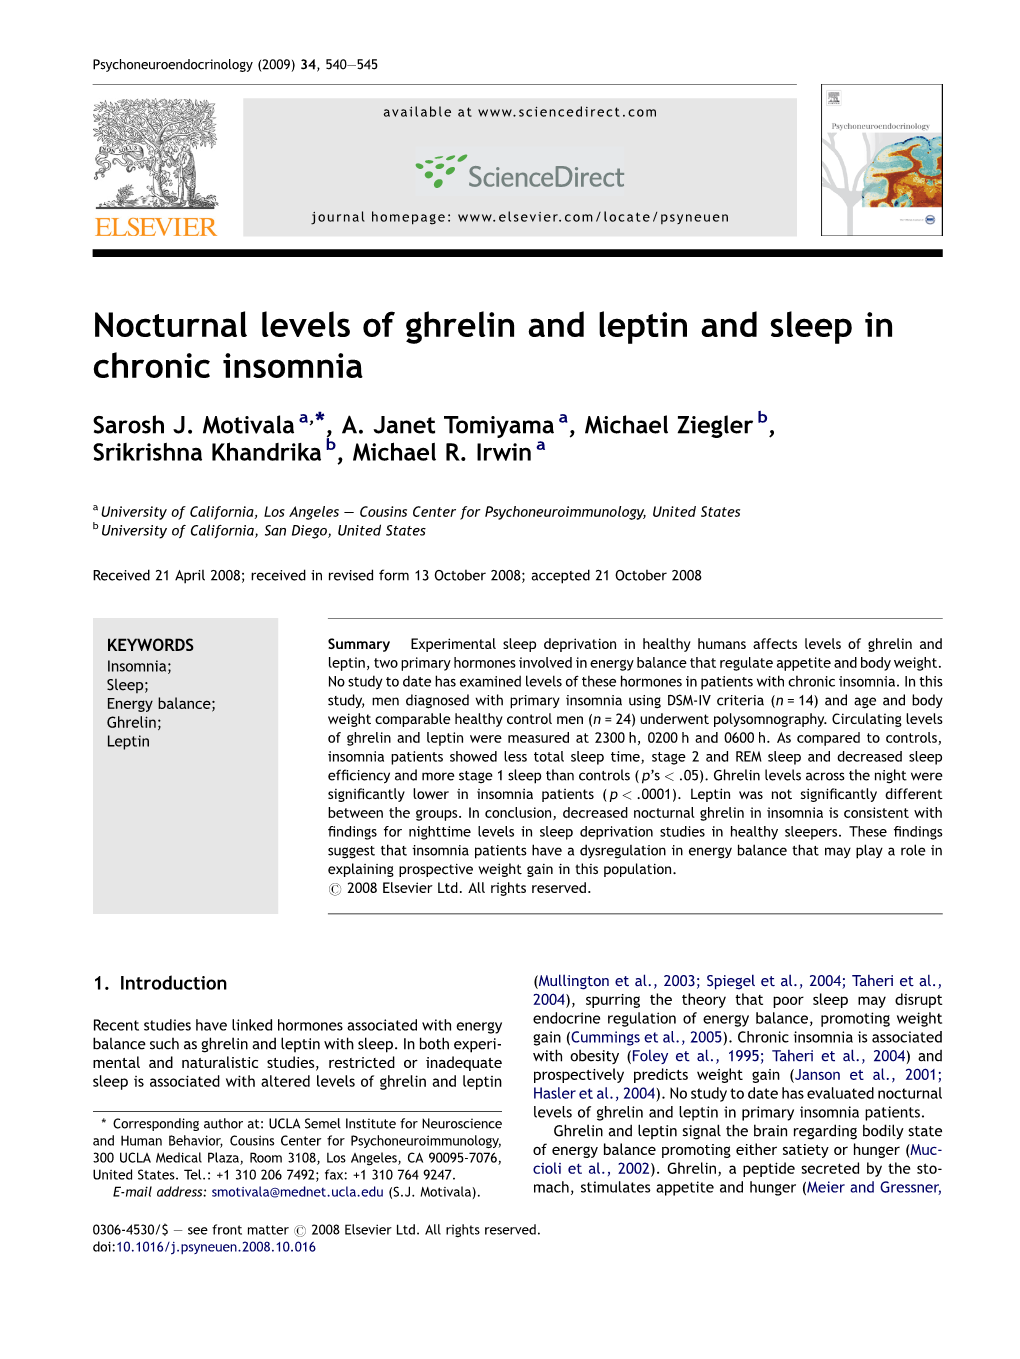 Nocturnal Levels of Ghrelin and Leptin and Sleep in Chronic Insomnia